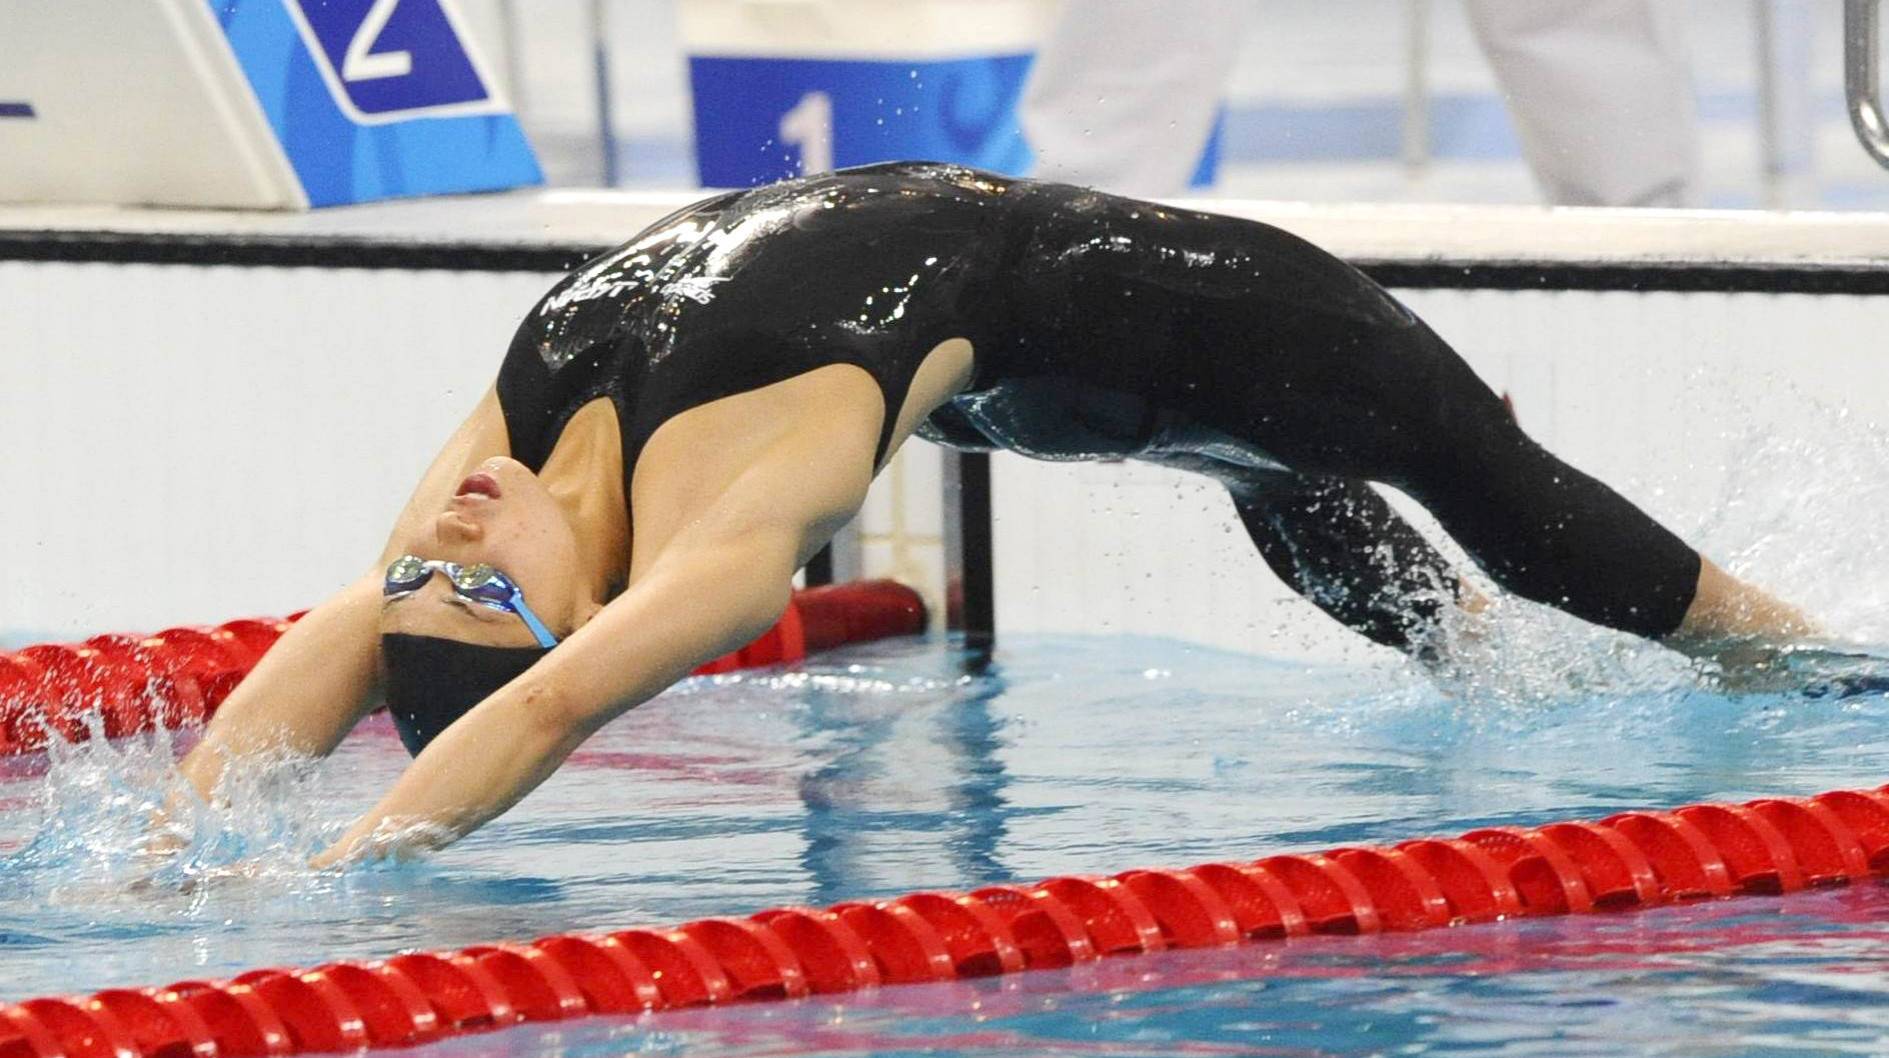 Hanae Ito competed in the women's 100-meter backstroke and 20-meter backstroke at the Beijing Olympics in August 2008. | KYODO